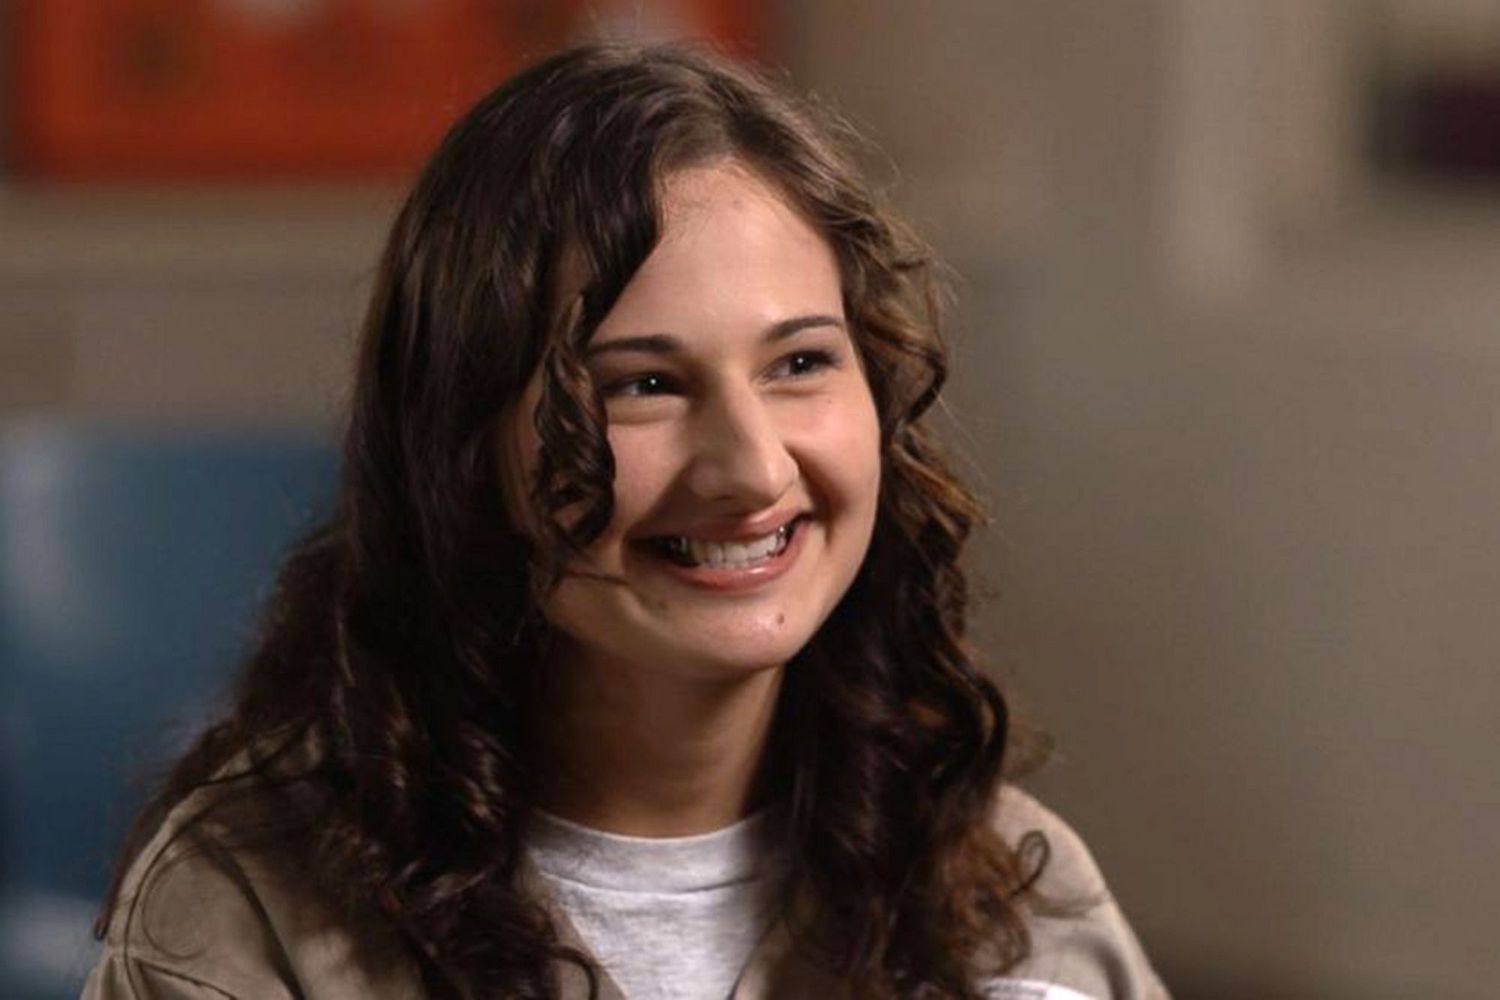 New Development: Gypsy Rose Blanchard Granted Parole, Set To Be Released Early